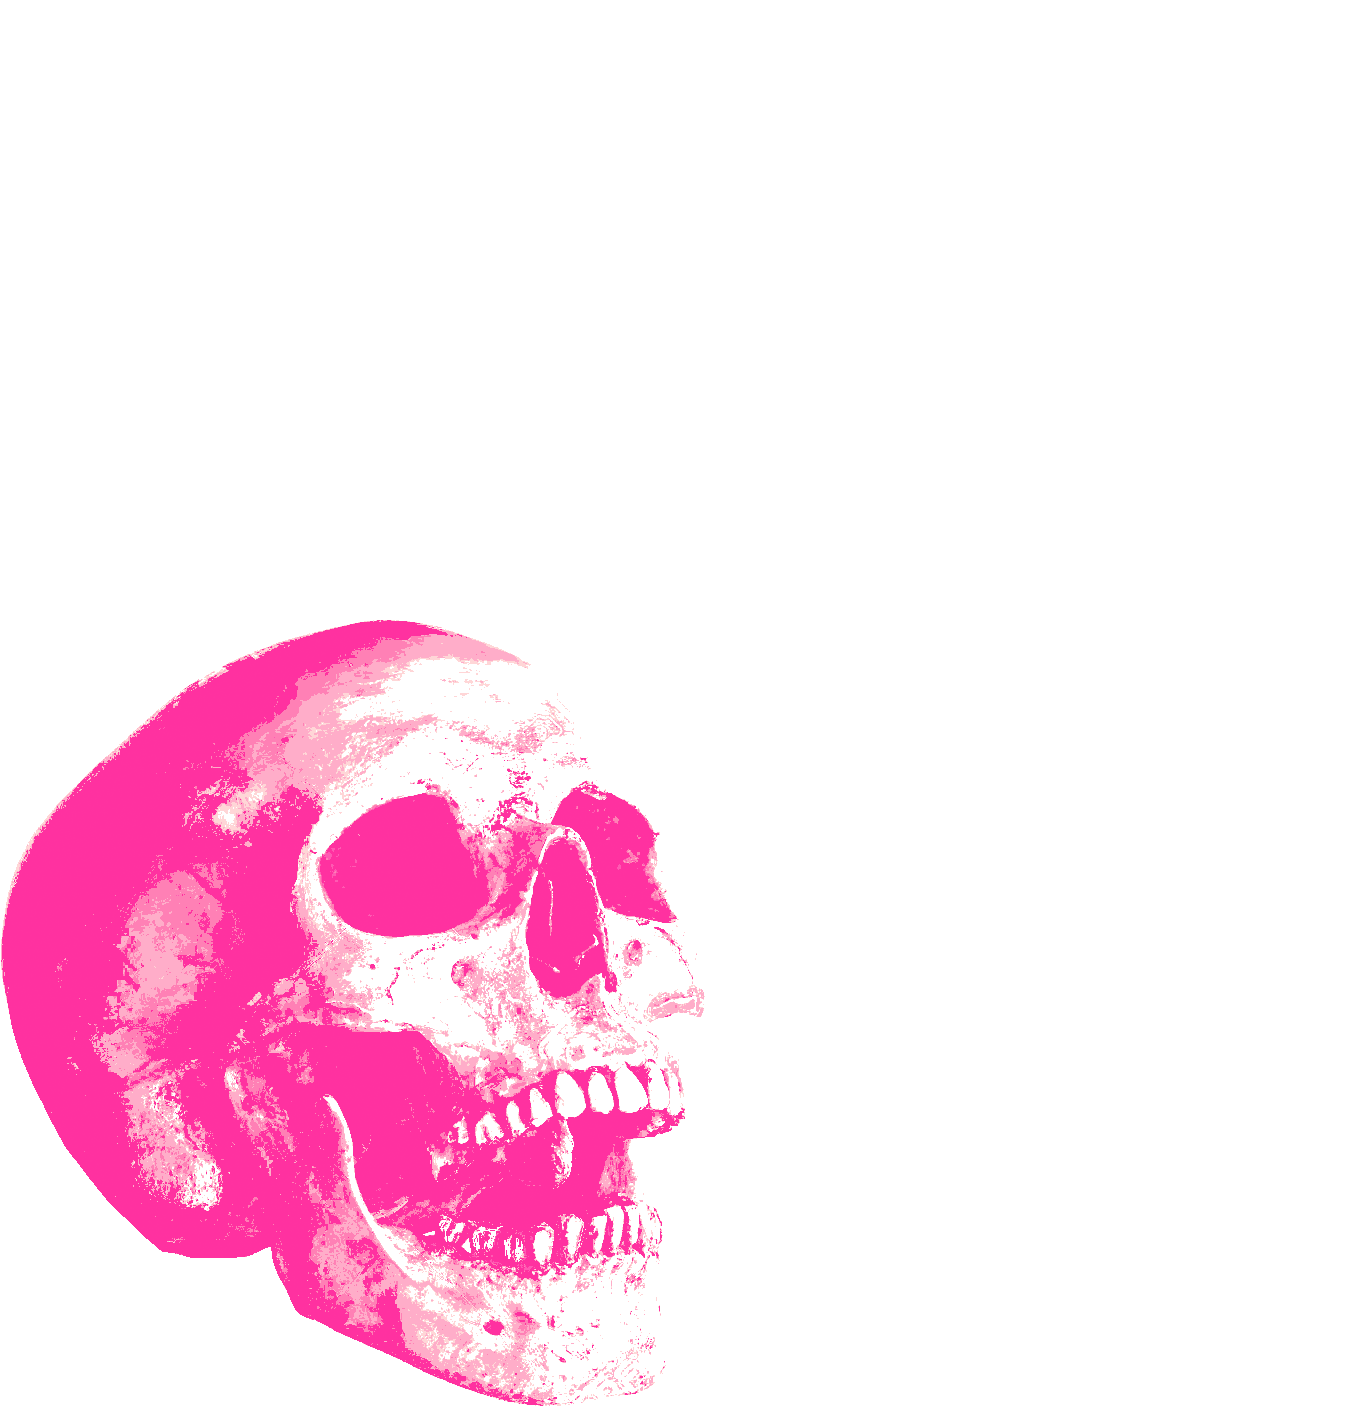 a yelling skull welcomes you to 90-SECOND MANIFESTOS